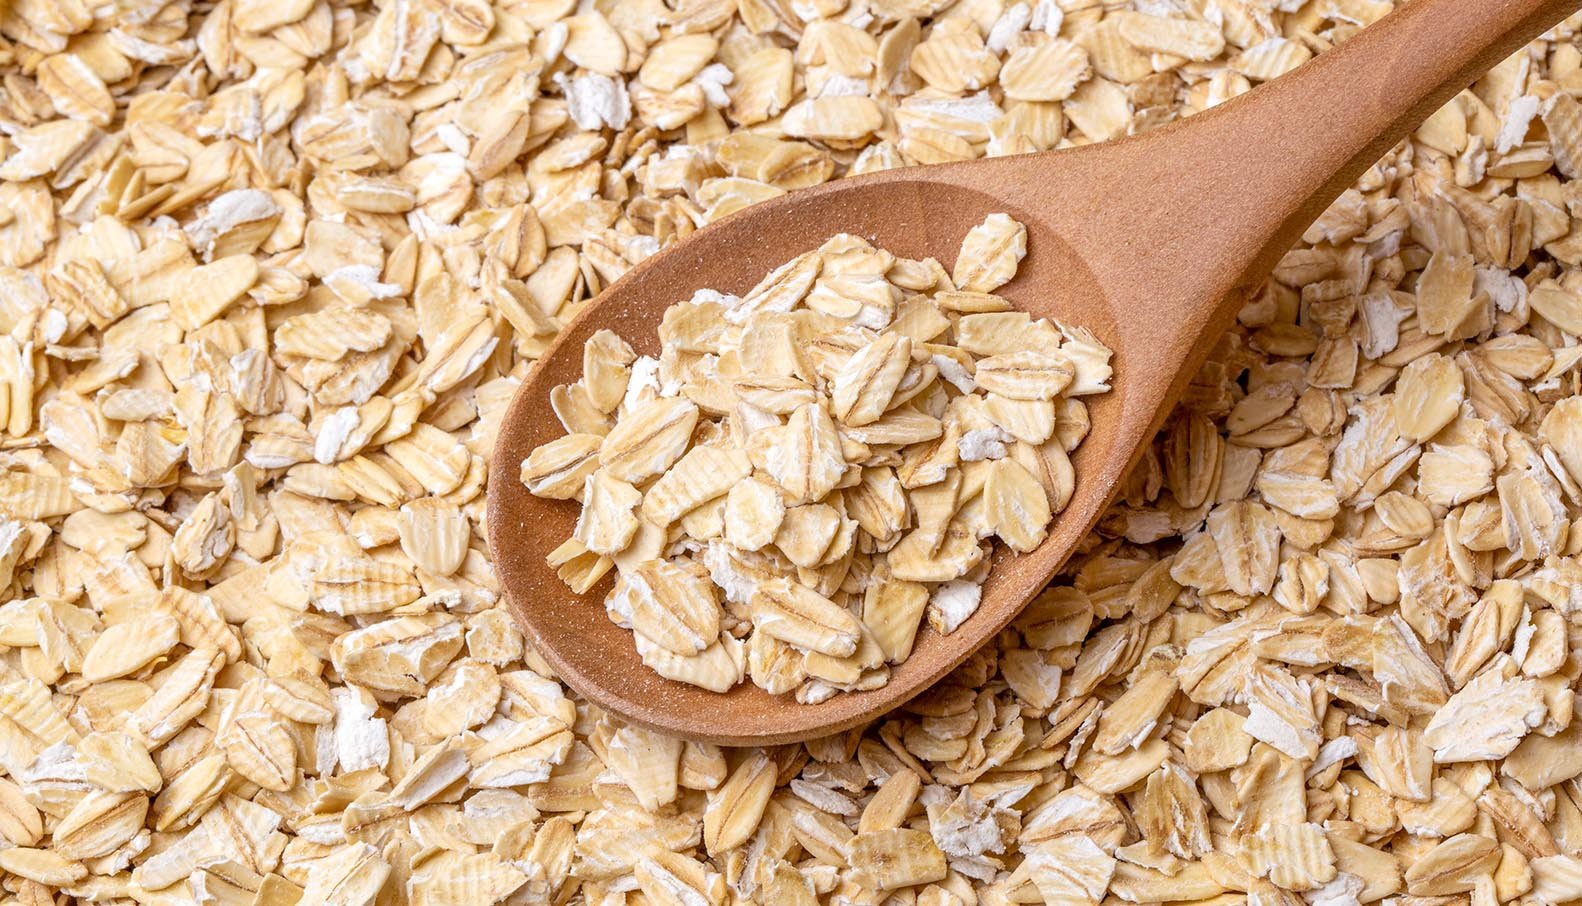 10-health-benefits-of-eating-oats-featured-image